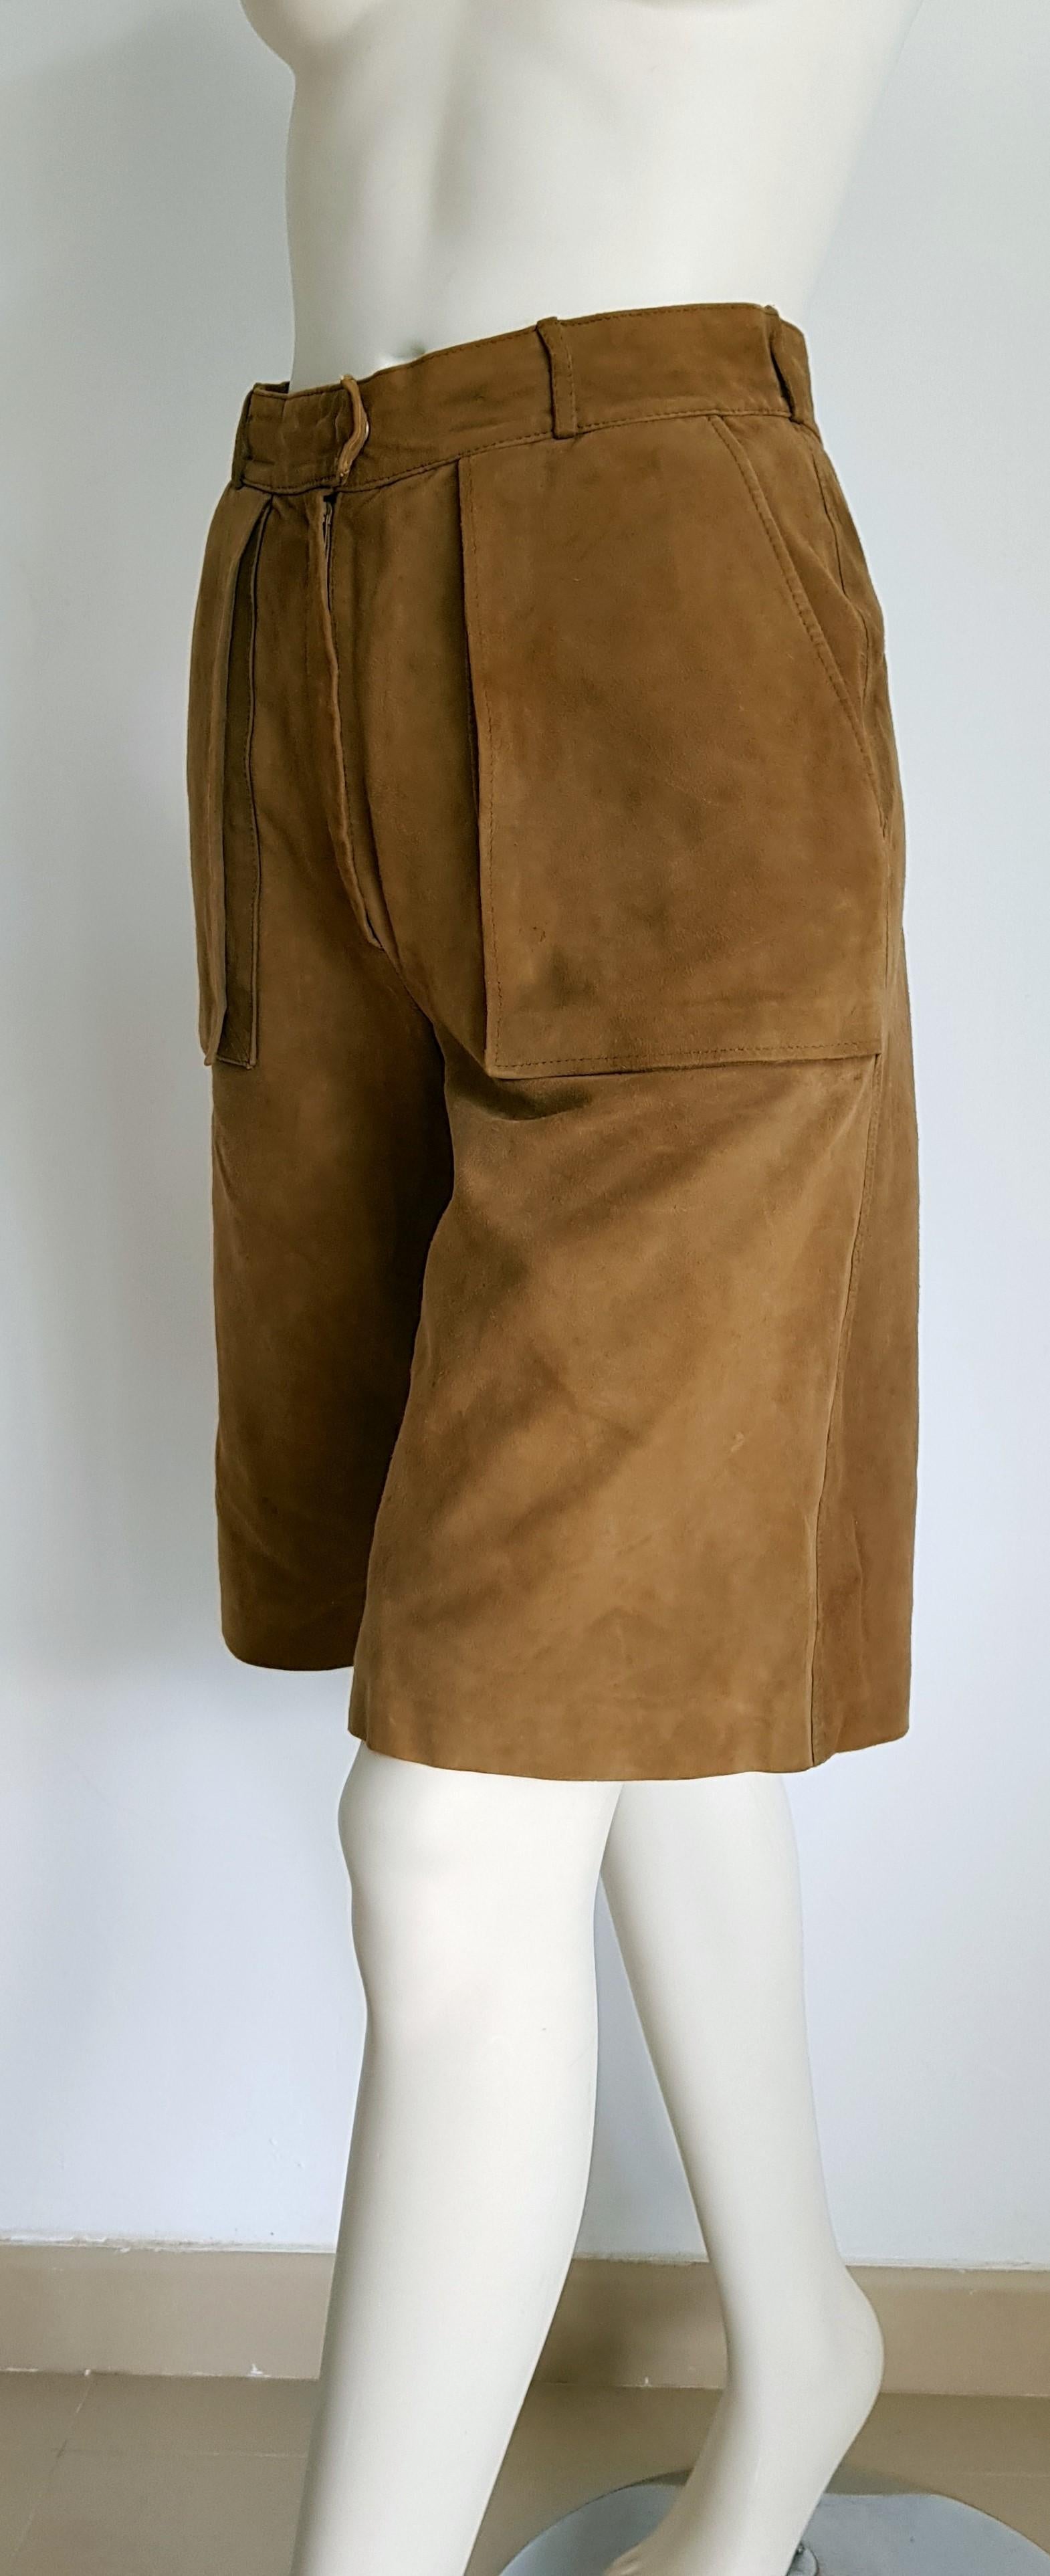 HERMÈS light brown Bermuda shorts suede pants - Unworn, New.

SIZE: equivalent to about Small / Medium, please review approx measurements as follows in cm. 
PANTS: lenght 60, inseam length 30, waist circumference 69, hip circumference 98, leg hem